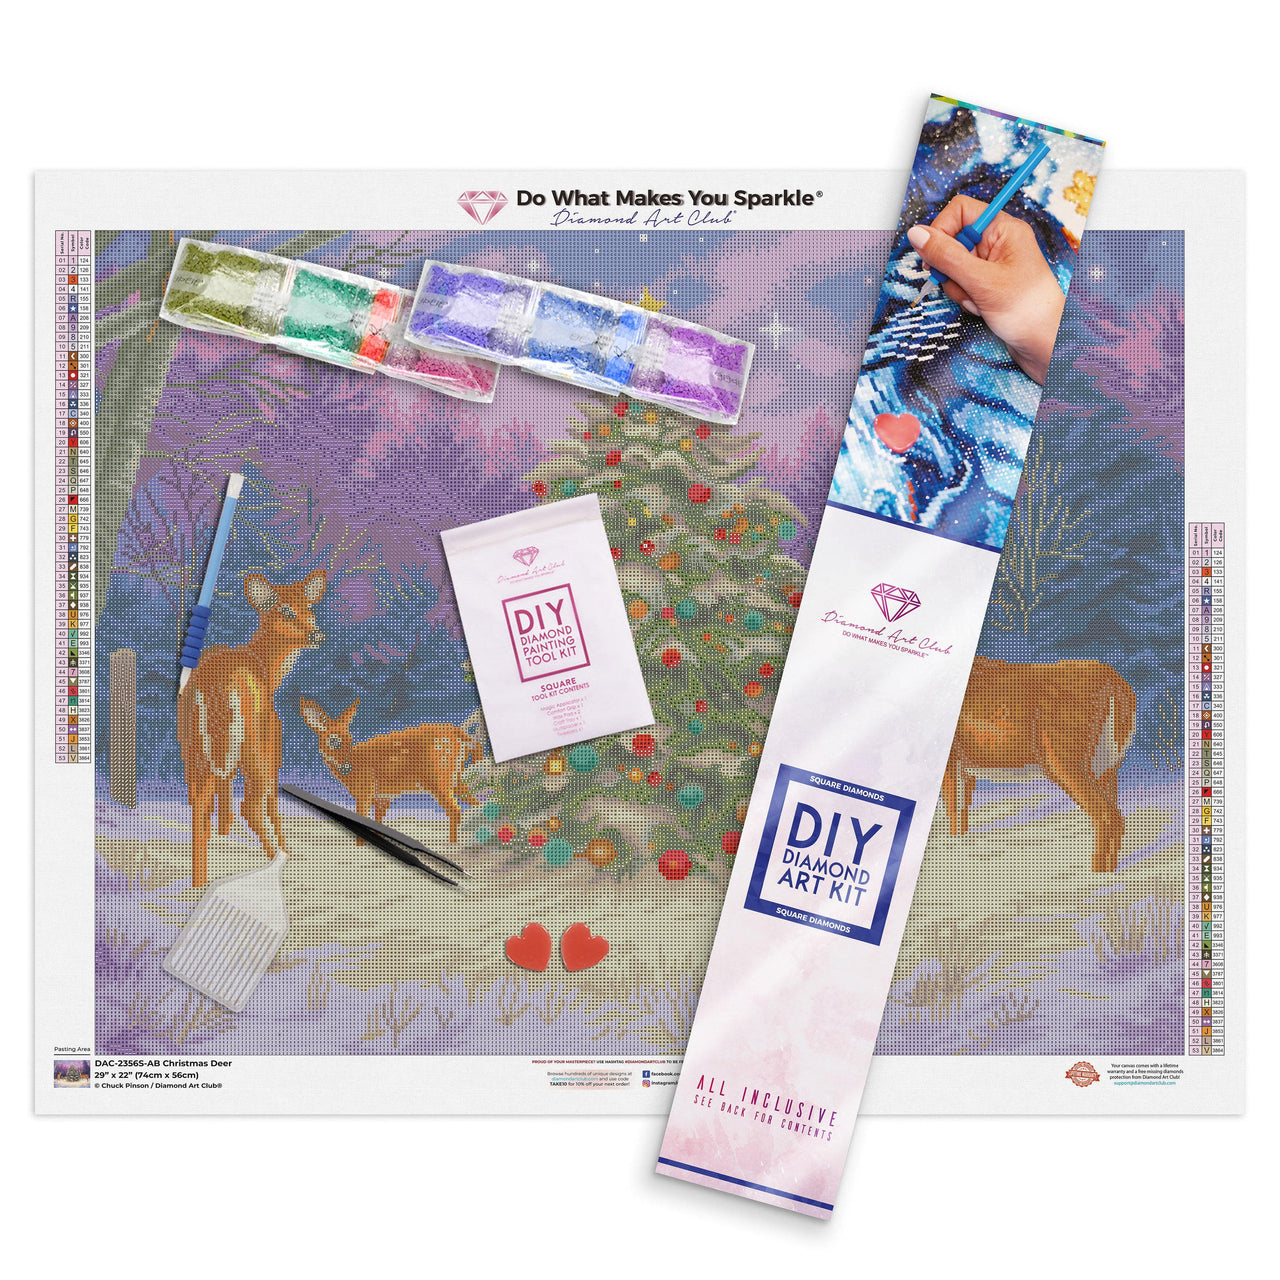 Diamond Painting Christmas Deer 29" x 22" (74cm x 56cm) / Square With 53 Colors Including 4 ABs / 64,532